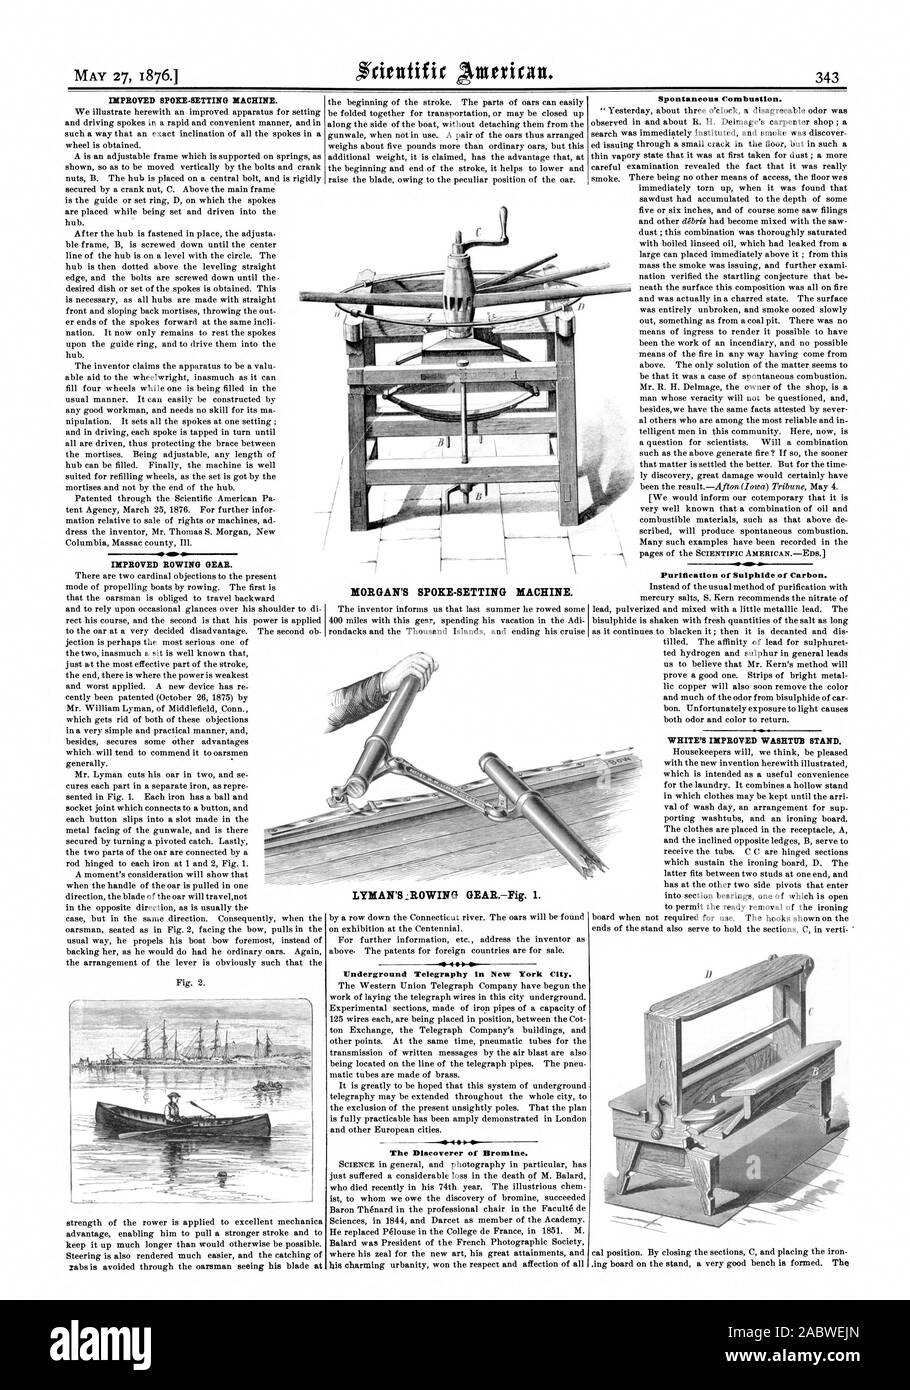 IMPROVED SPOKE-SETTING MACHINE. IMPROVED ROWING GEAR. MORGAN'S SPOKE-SETTING MACHINE. Underground Telegraphy in New York City. Spontaneous Combustion. vo. Purification of Sulphide of Carbon. WHITE'S IMPROVED WASHTUB STAND. The Discoverer of Bromine., scientific american, 1876-05-27 Stock Photo